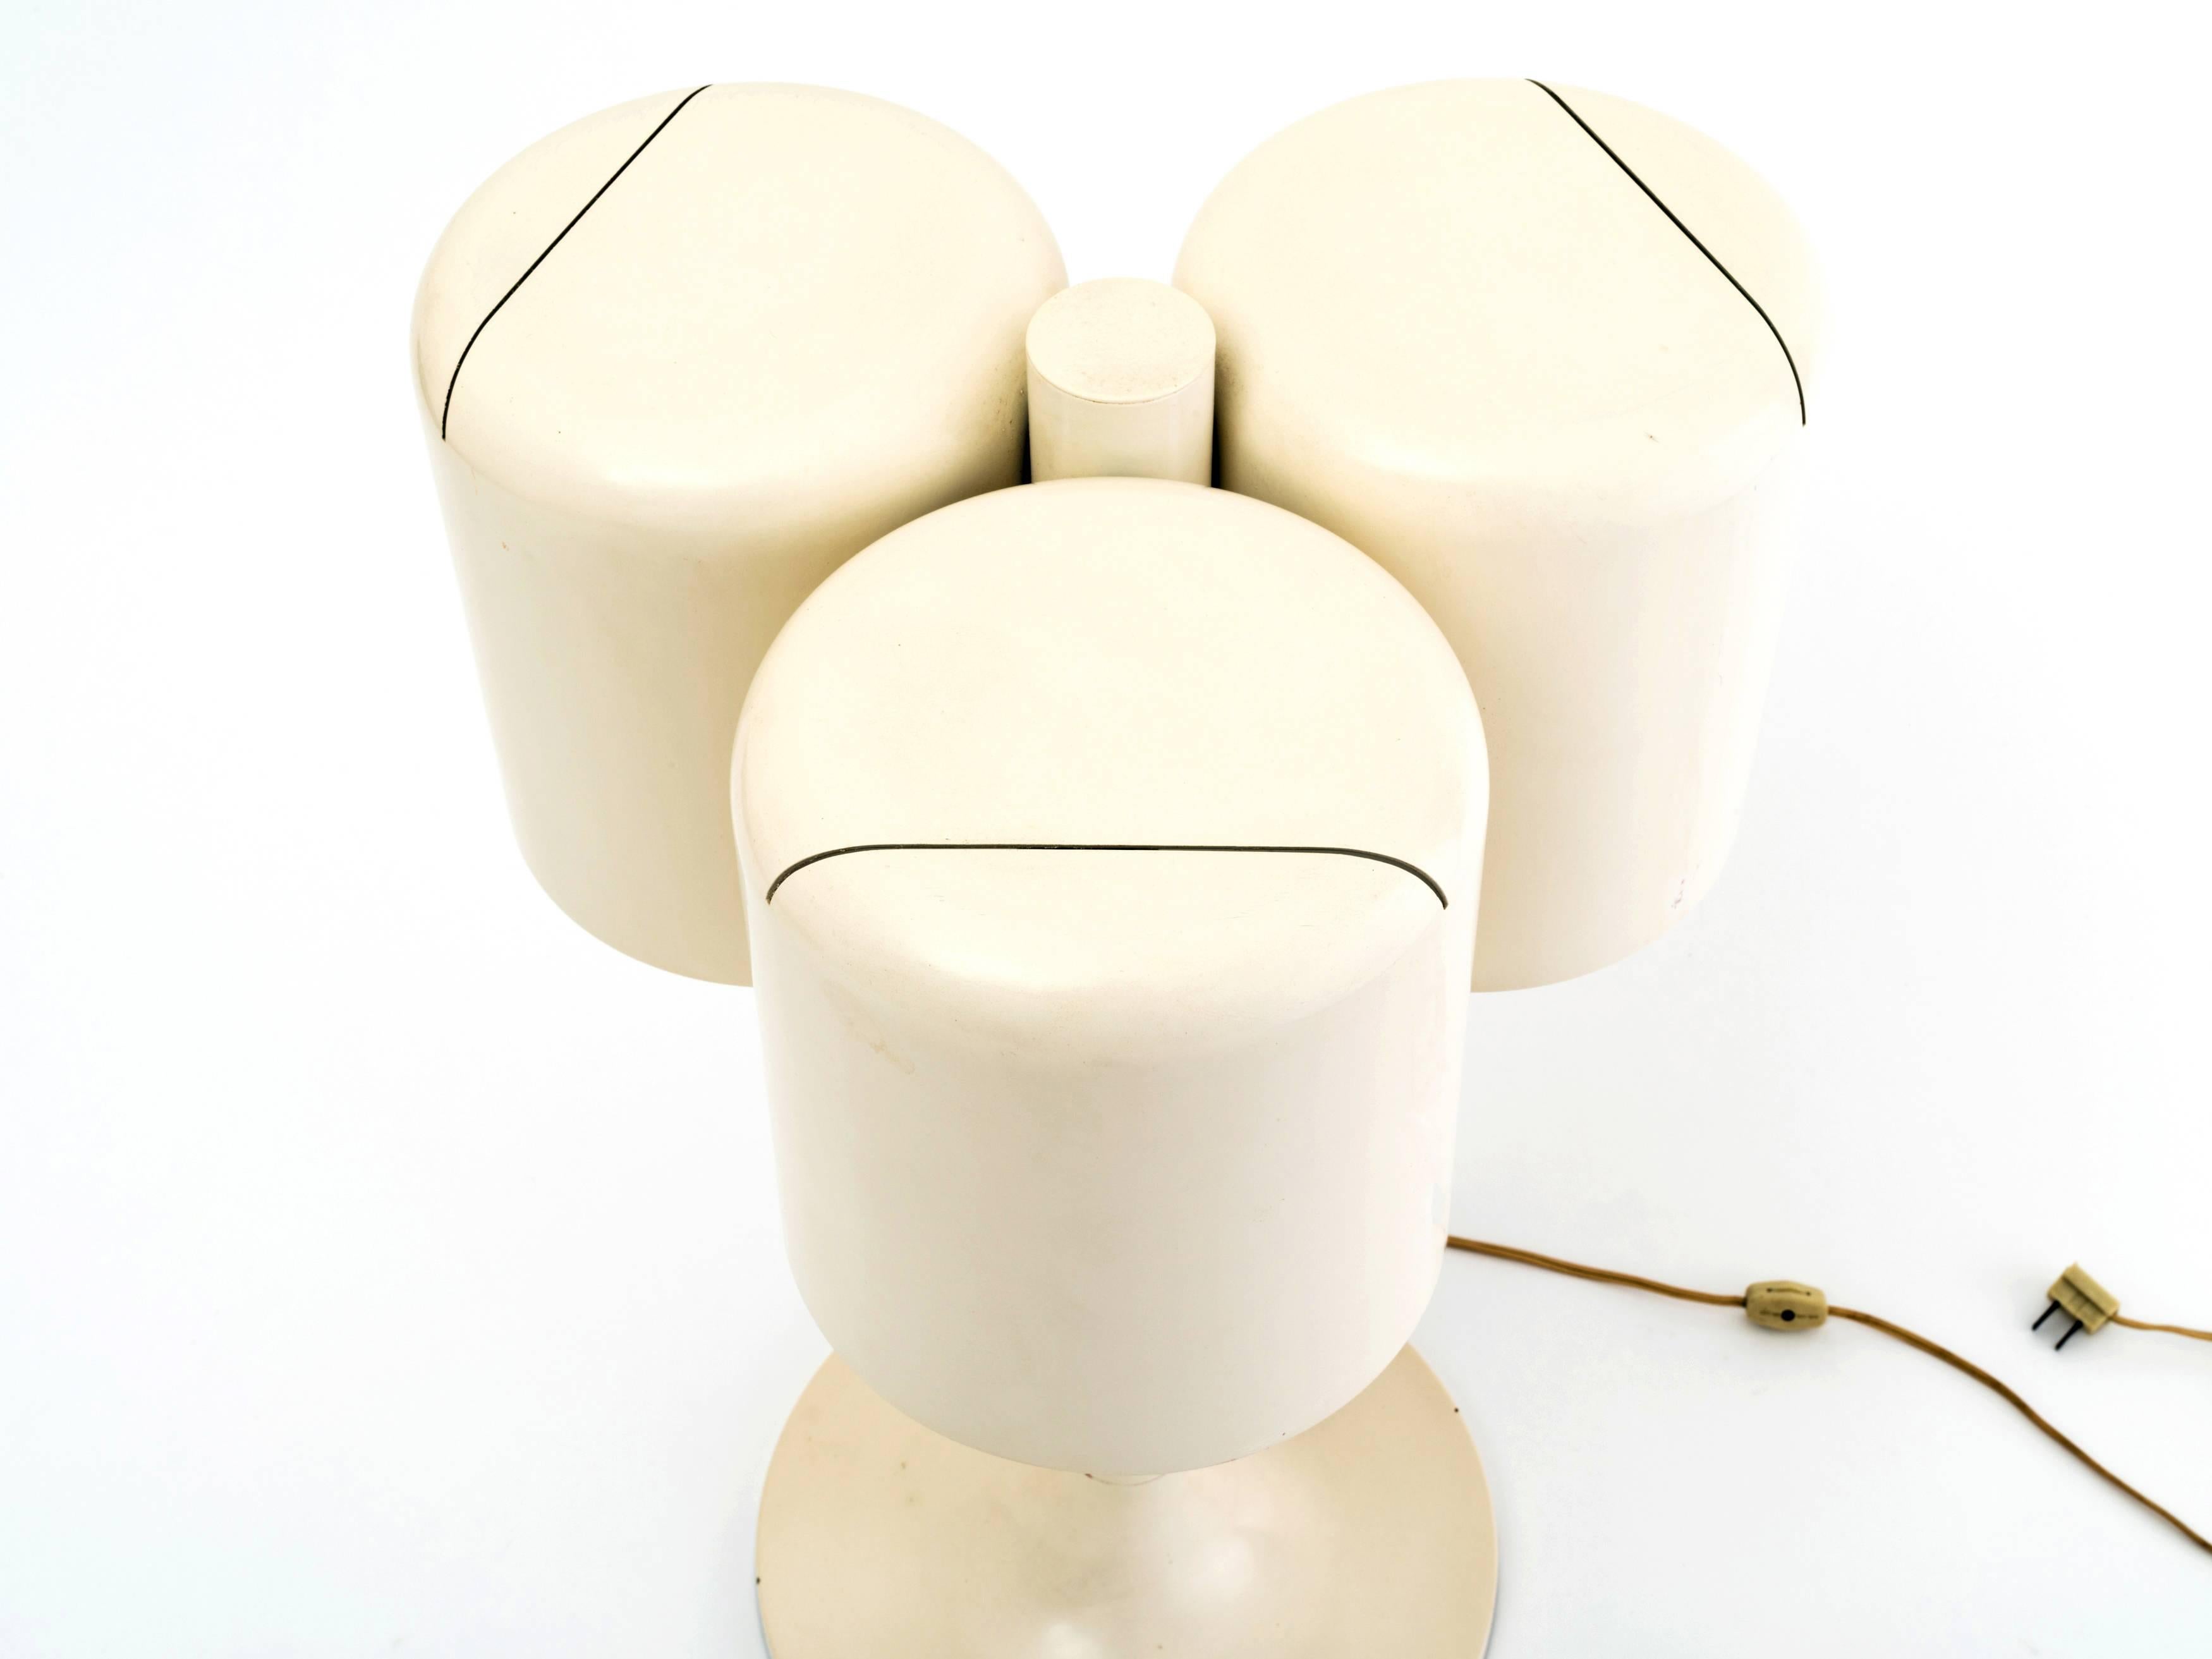 An uncommon table lamp designed by Neal Small in 1971 with a Classic tulip base in steel that supports three cylindrical shades in aluminum, all in an off-white lacquer. Each shade has an off-center slit at top, providing for a subtle uplight glow.